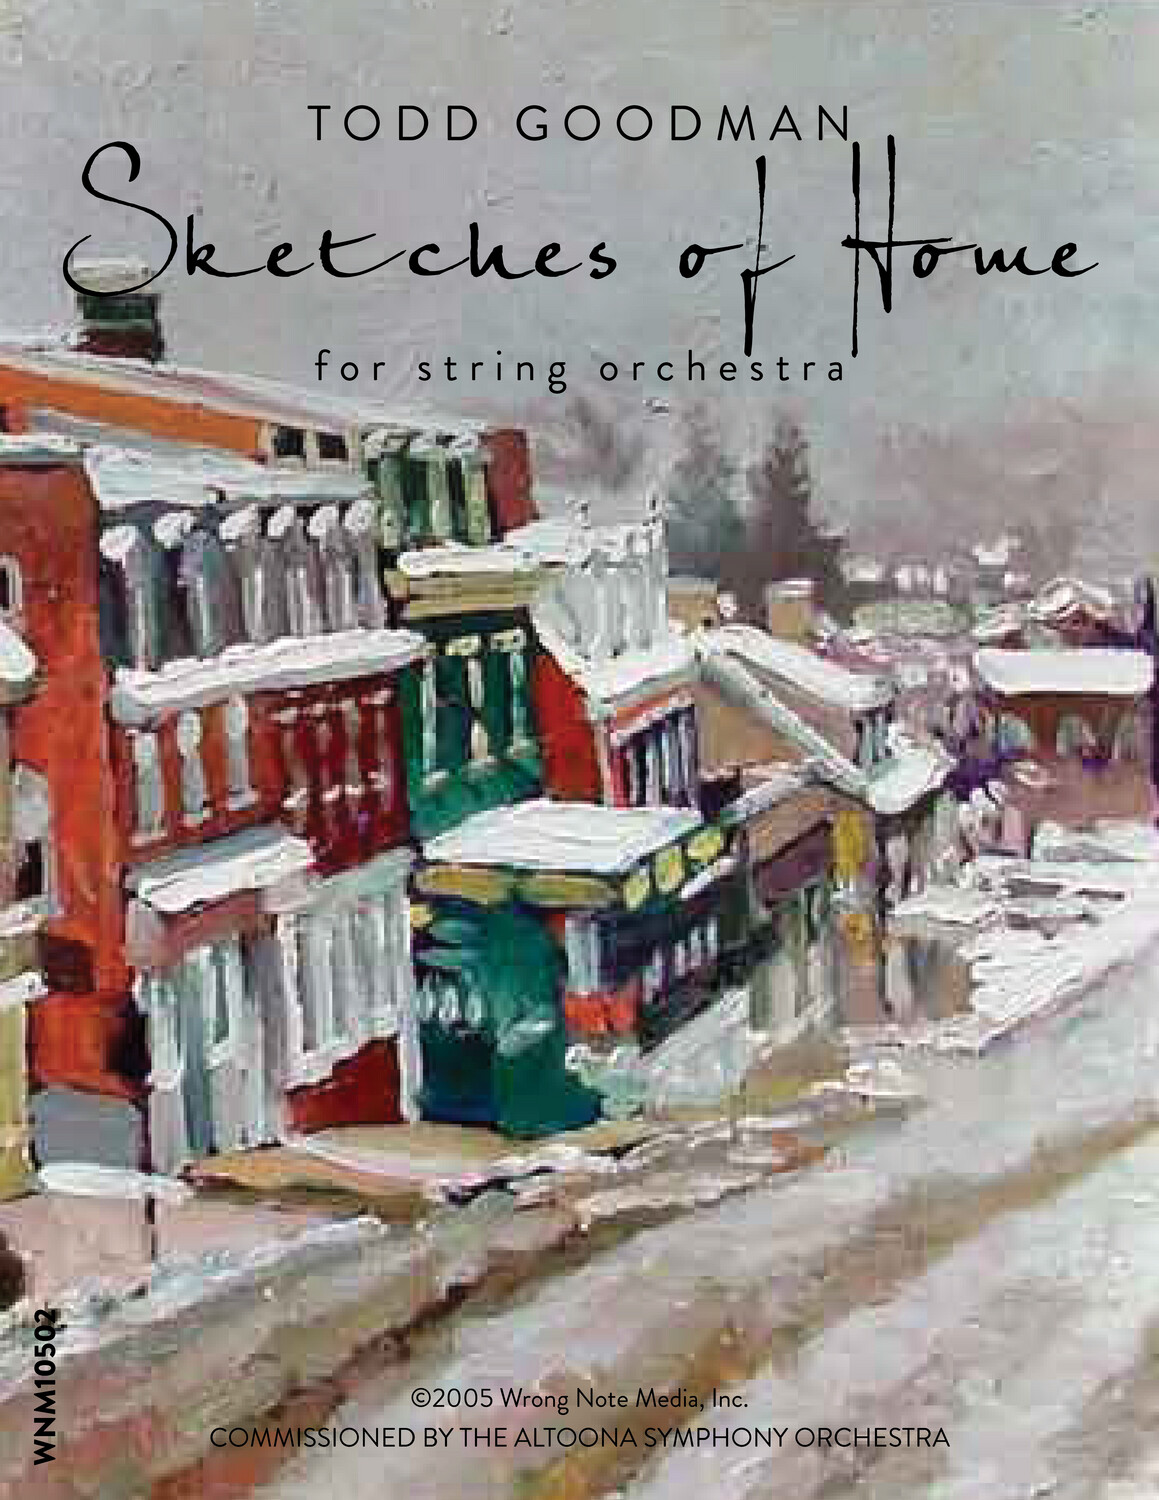 Sketches of Home - string orchestra, by Todd Goodman